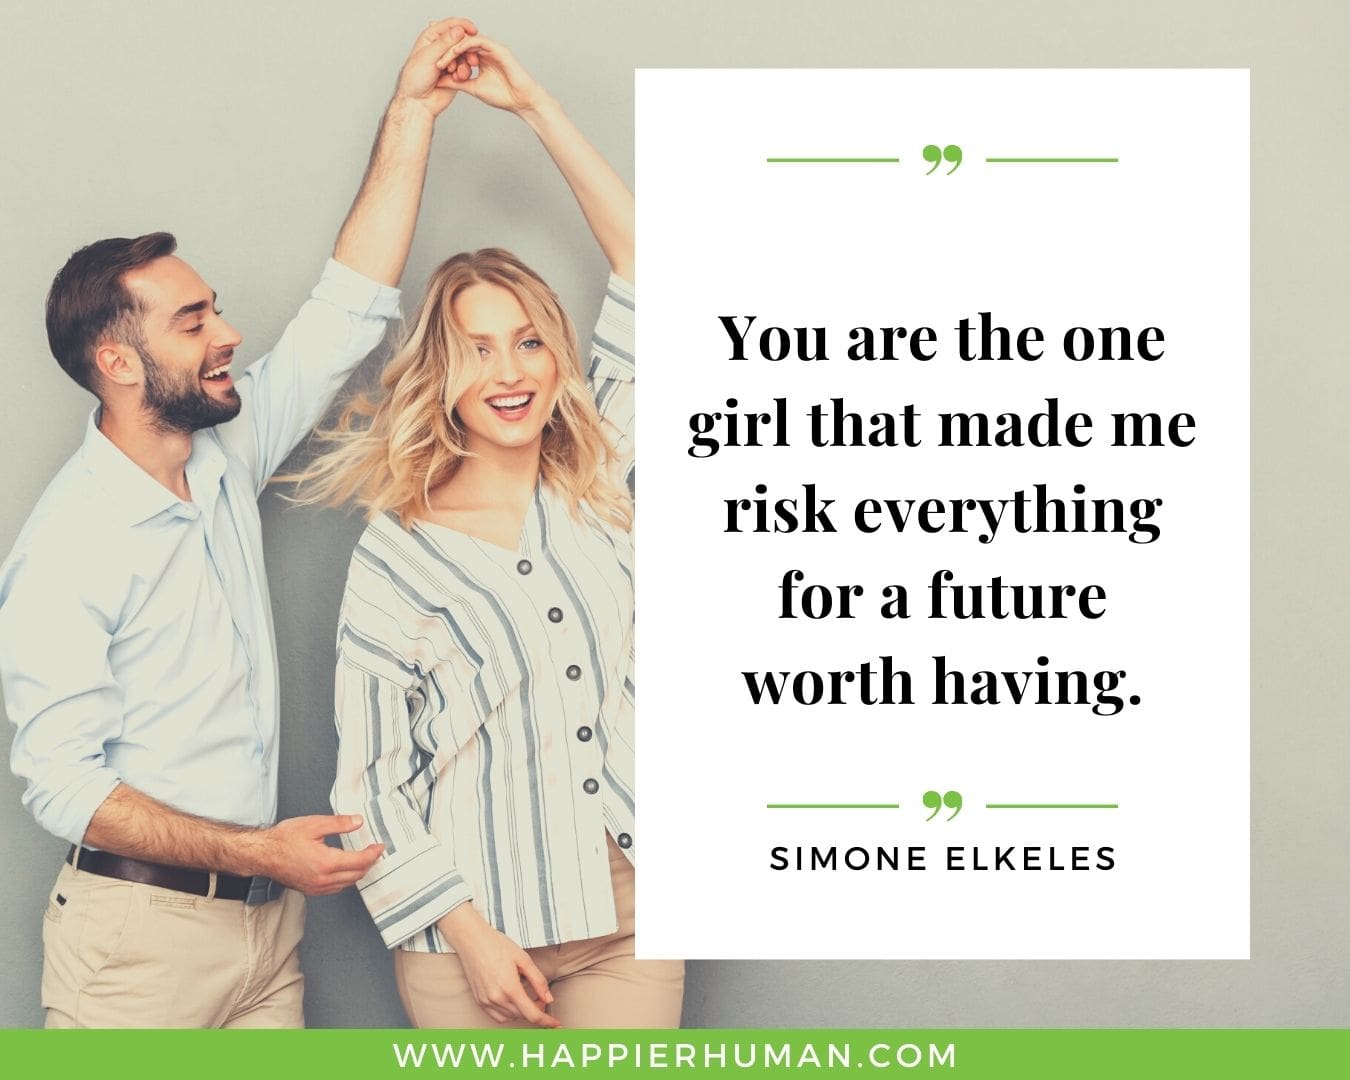 Sweet and Romantic Love Quotes for Her - “You are the one girl that made me risk everything for a future worth having.” – Simone Elkeles